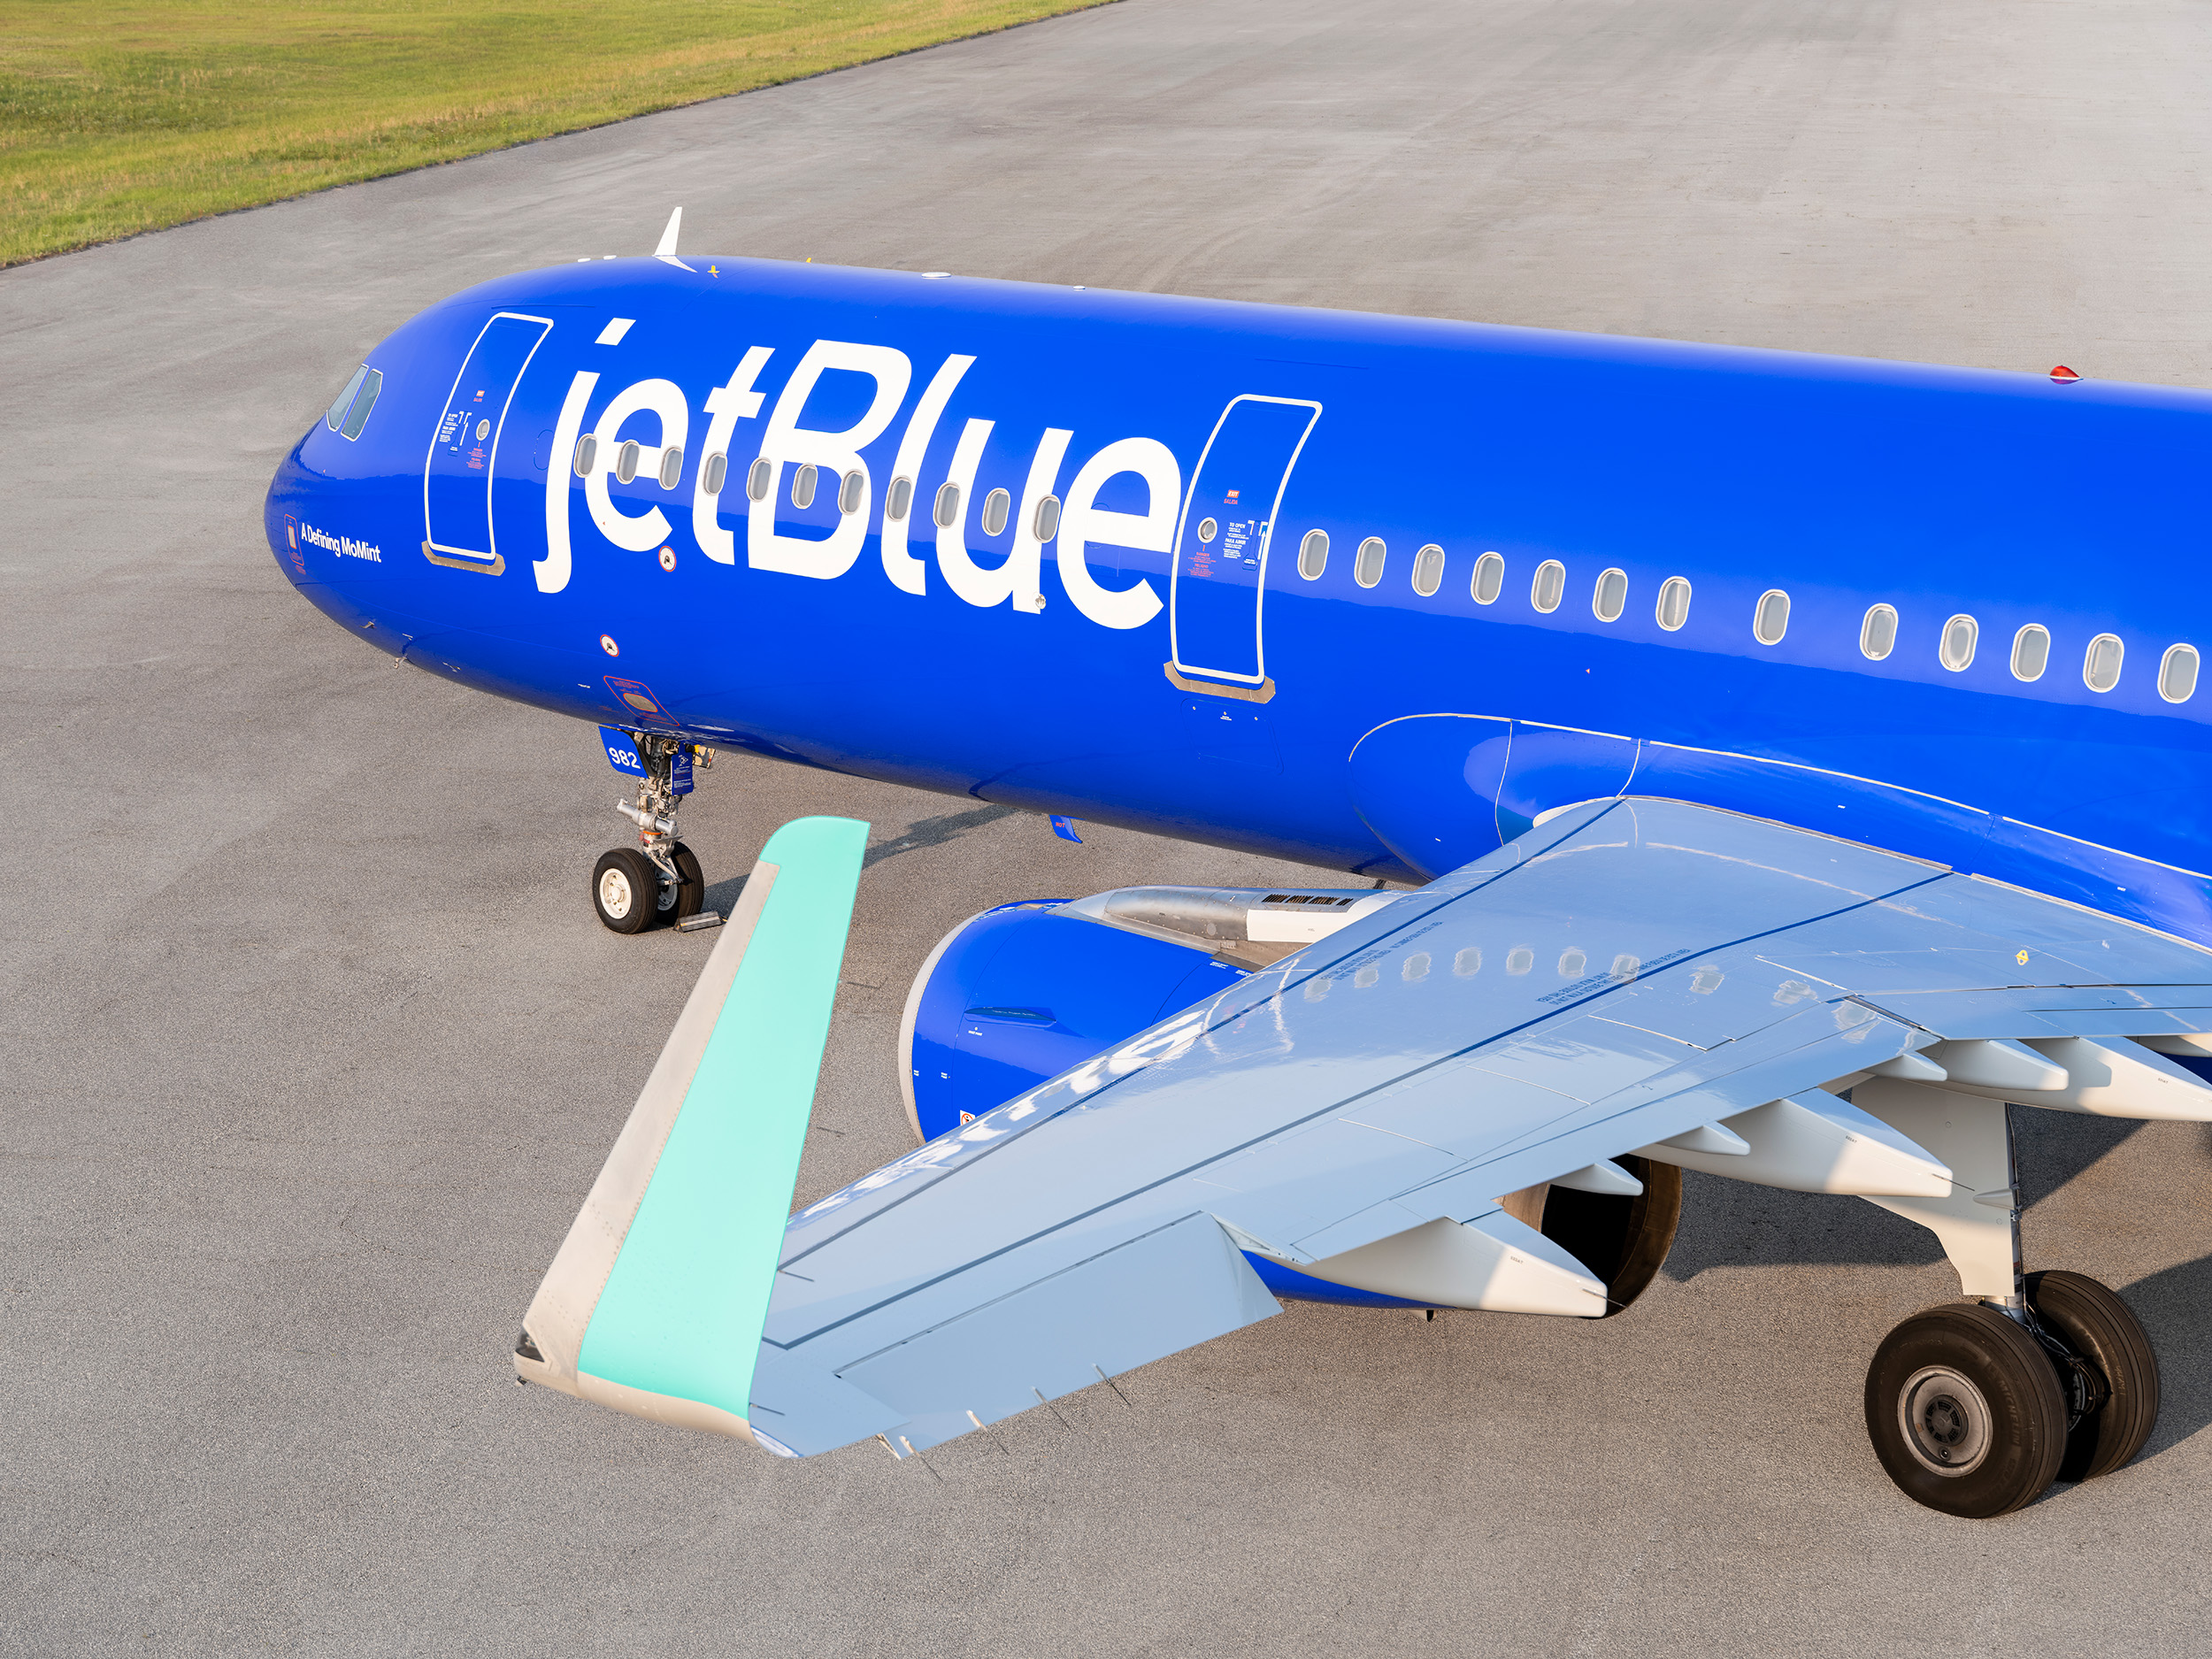 JetBlue Axes Five Destinations, Cuts 16 More Routes to Return to Profitability